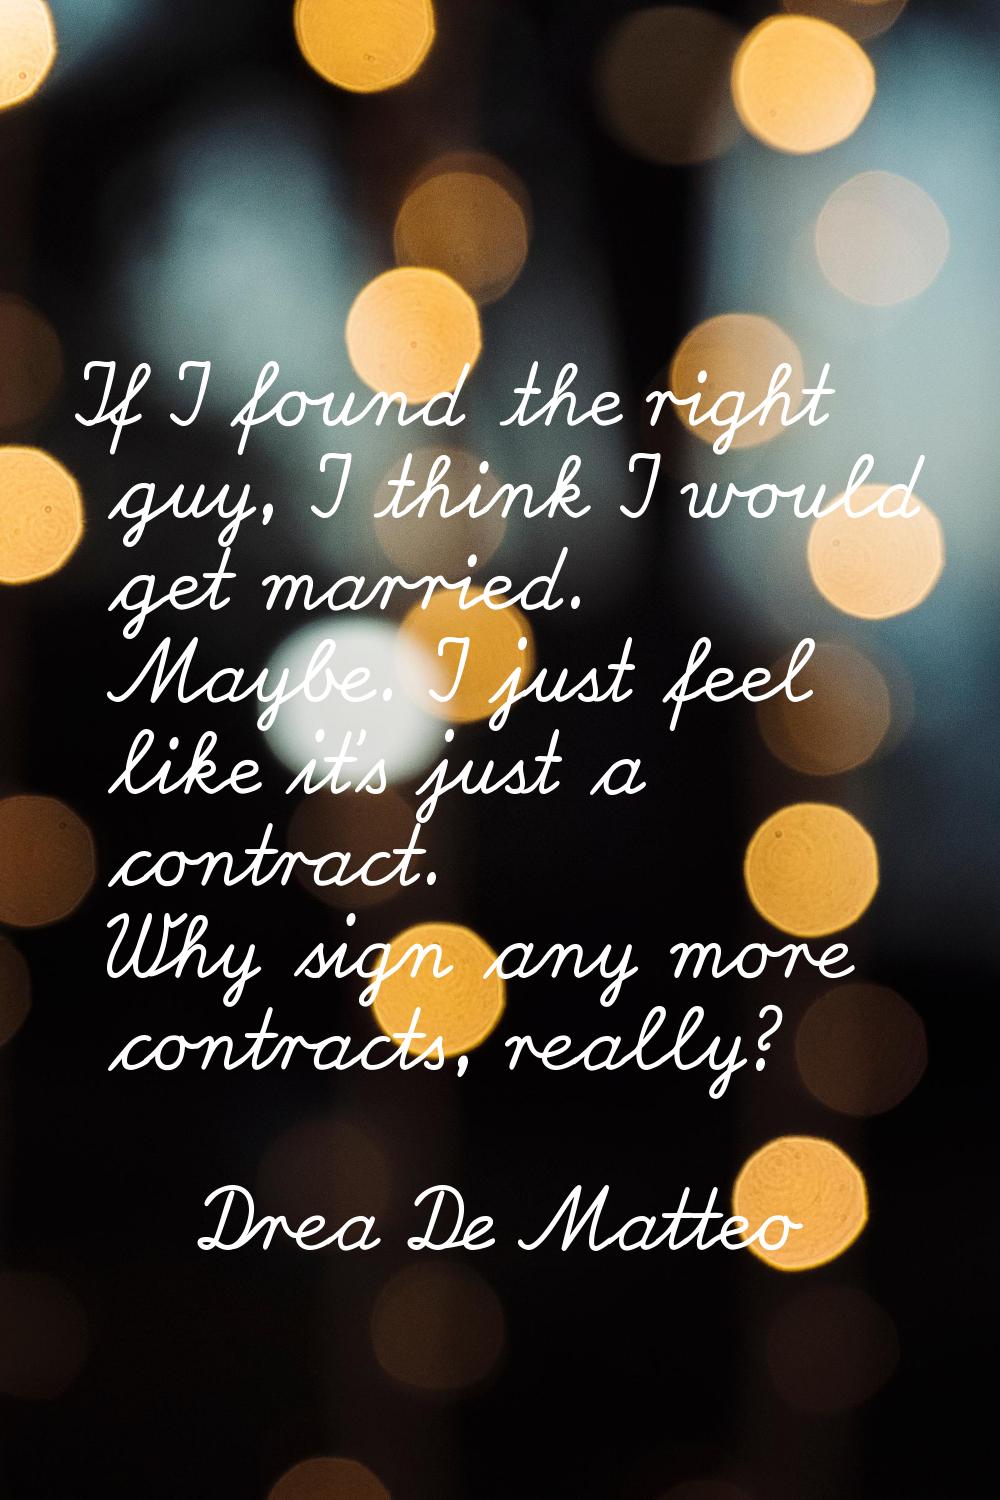 If I found the right guy, I think I would get married. Maybe. I just feel like it's just a contract